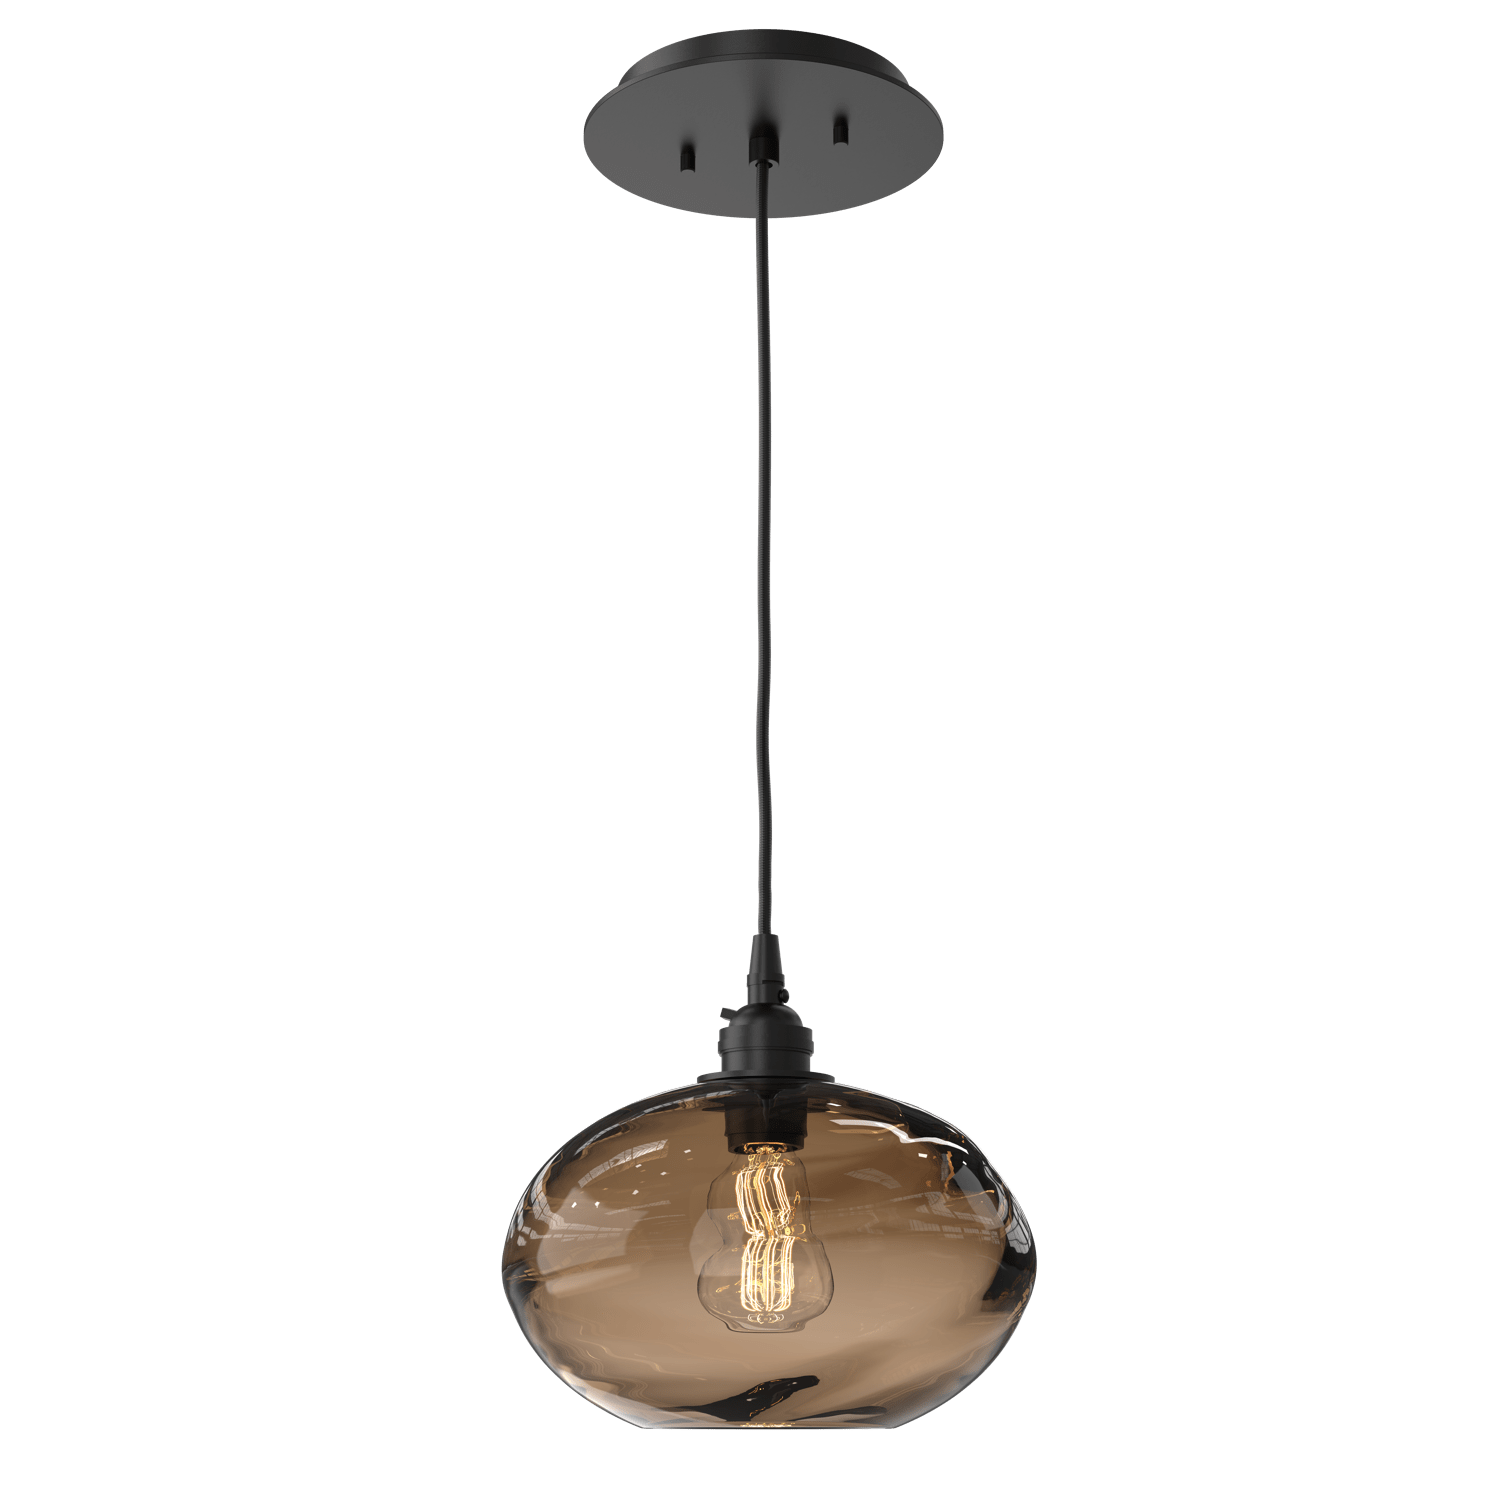 LAB0036-01-MB-OB-Hammerton-Studio-Optic-Blown-Glass-Coppa-pendant-light-with-matte-black-finish-and-optic-bronze-blown-glass-shades-and-incandescent-lamping